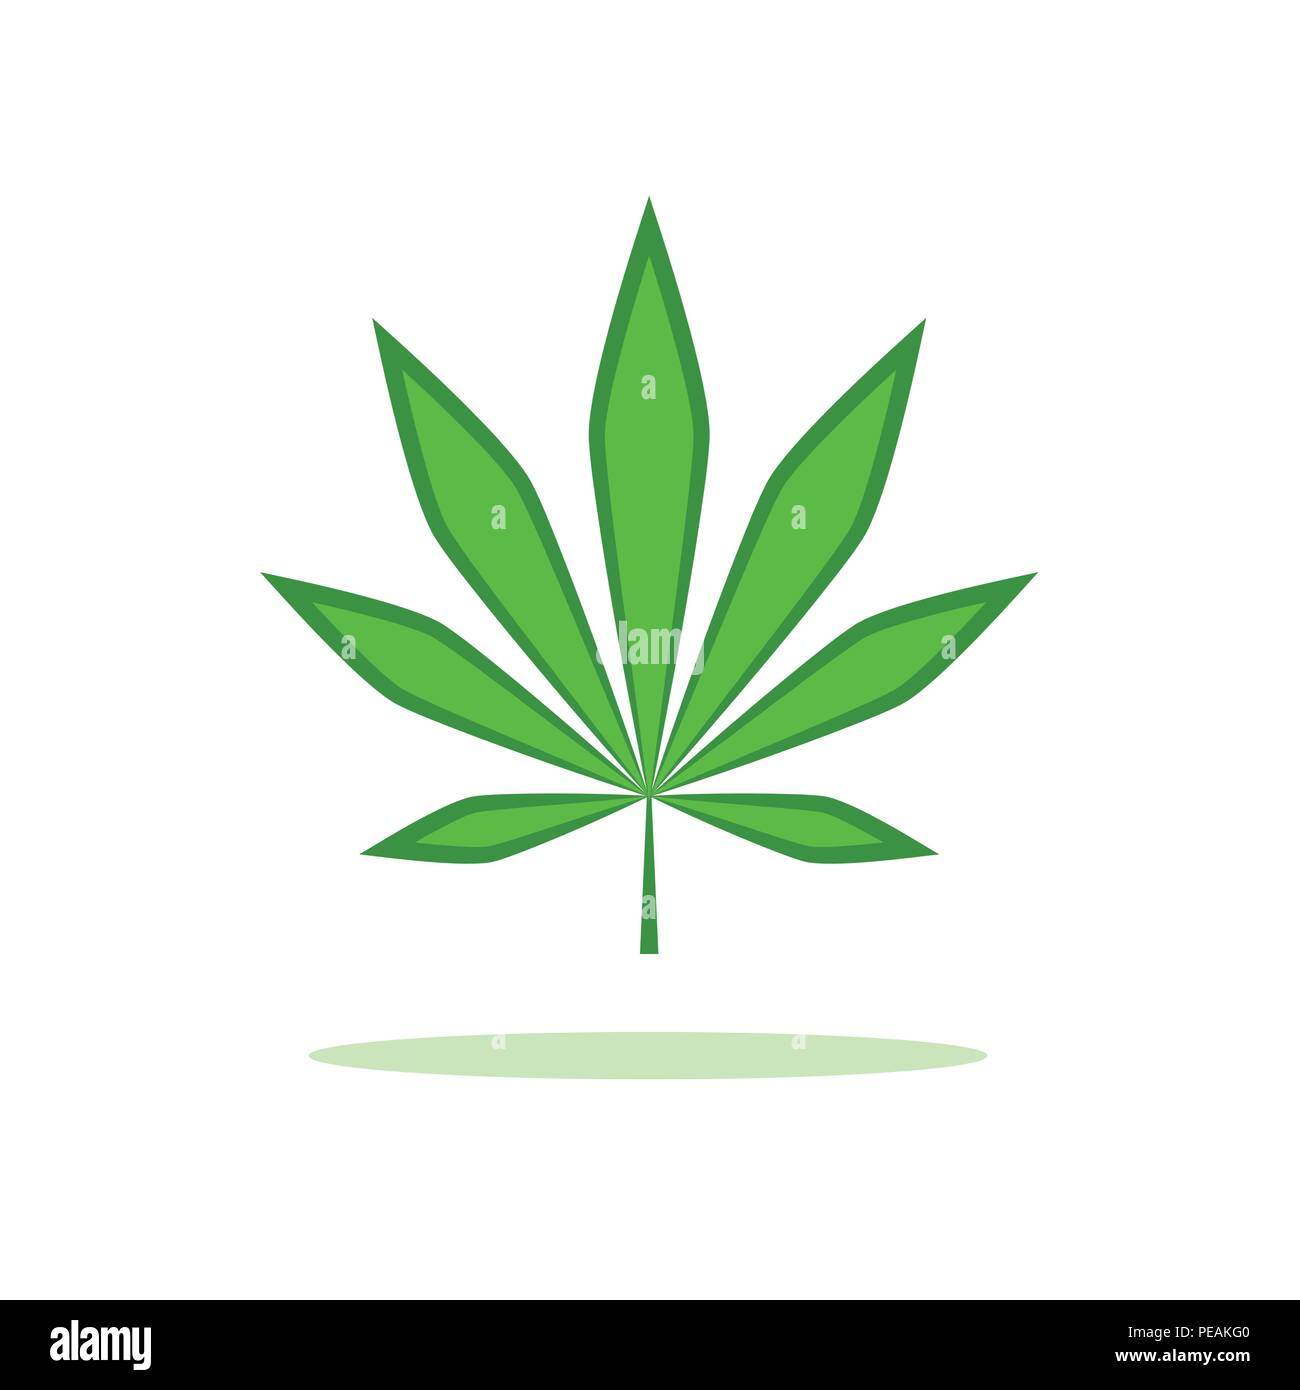 green cannabis leaf simple drawing vector illustration EPS10 Stock Vector